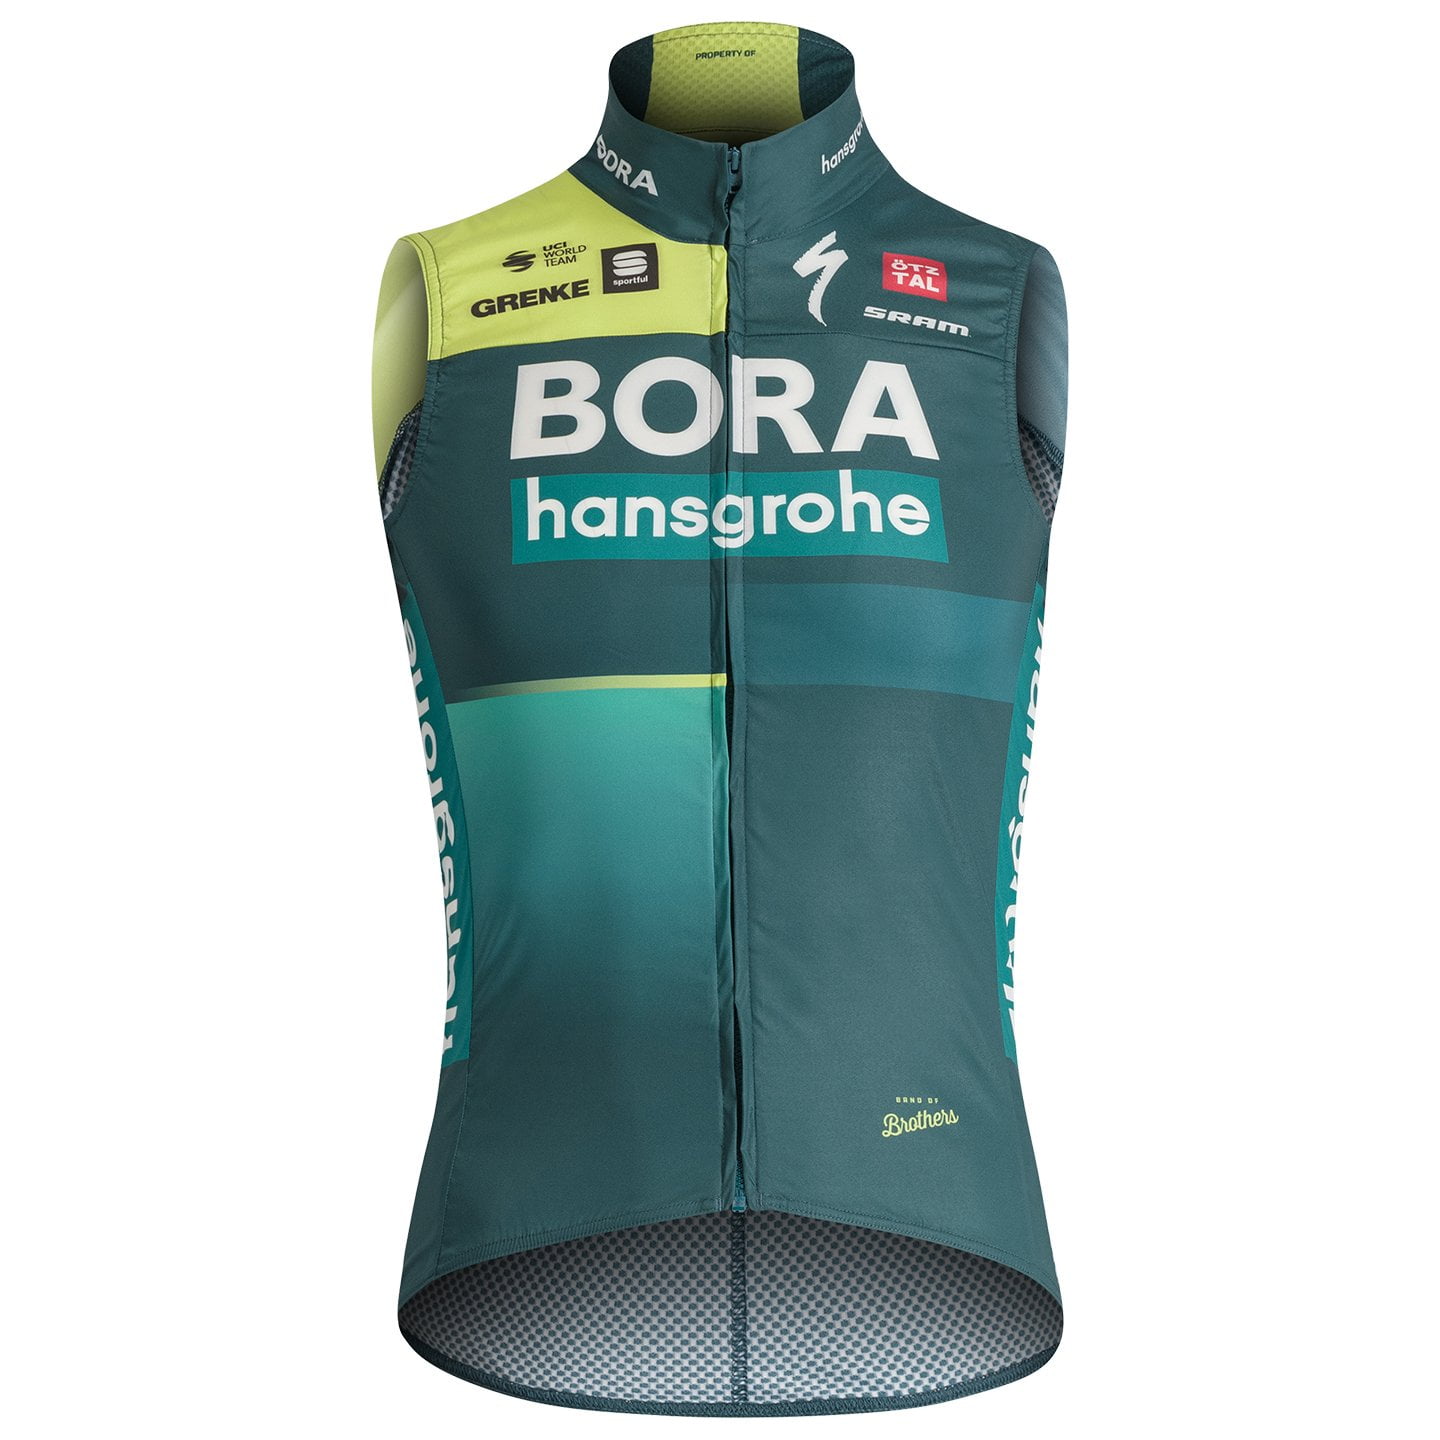 BORA-hansgrohe 2024 Wind Vest, for men, size L, Cycling vest, Cycle gear